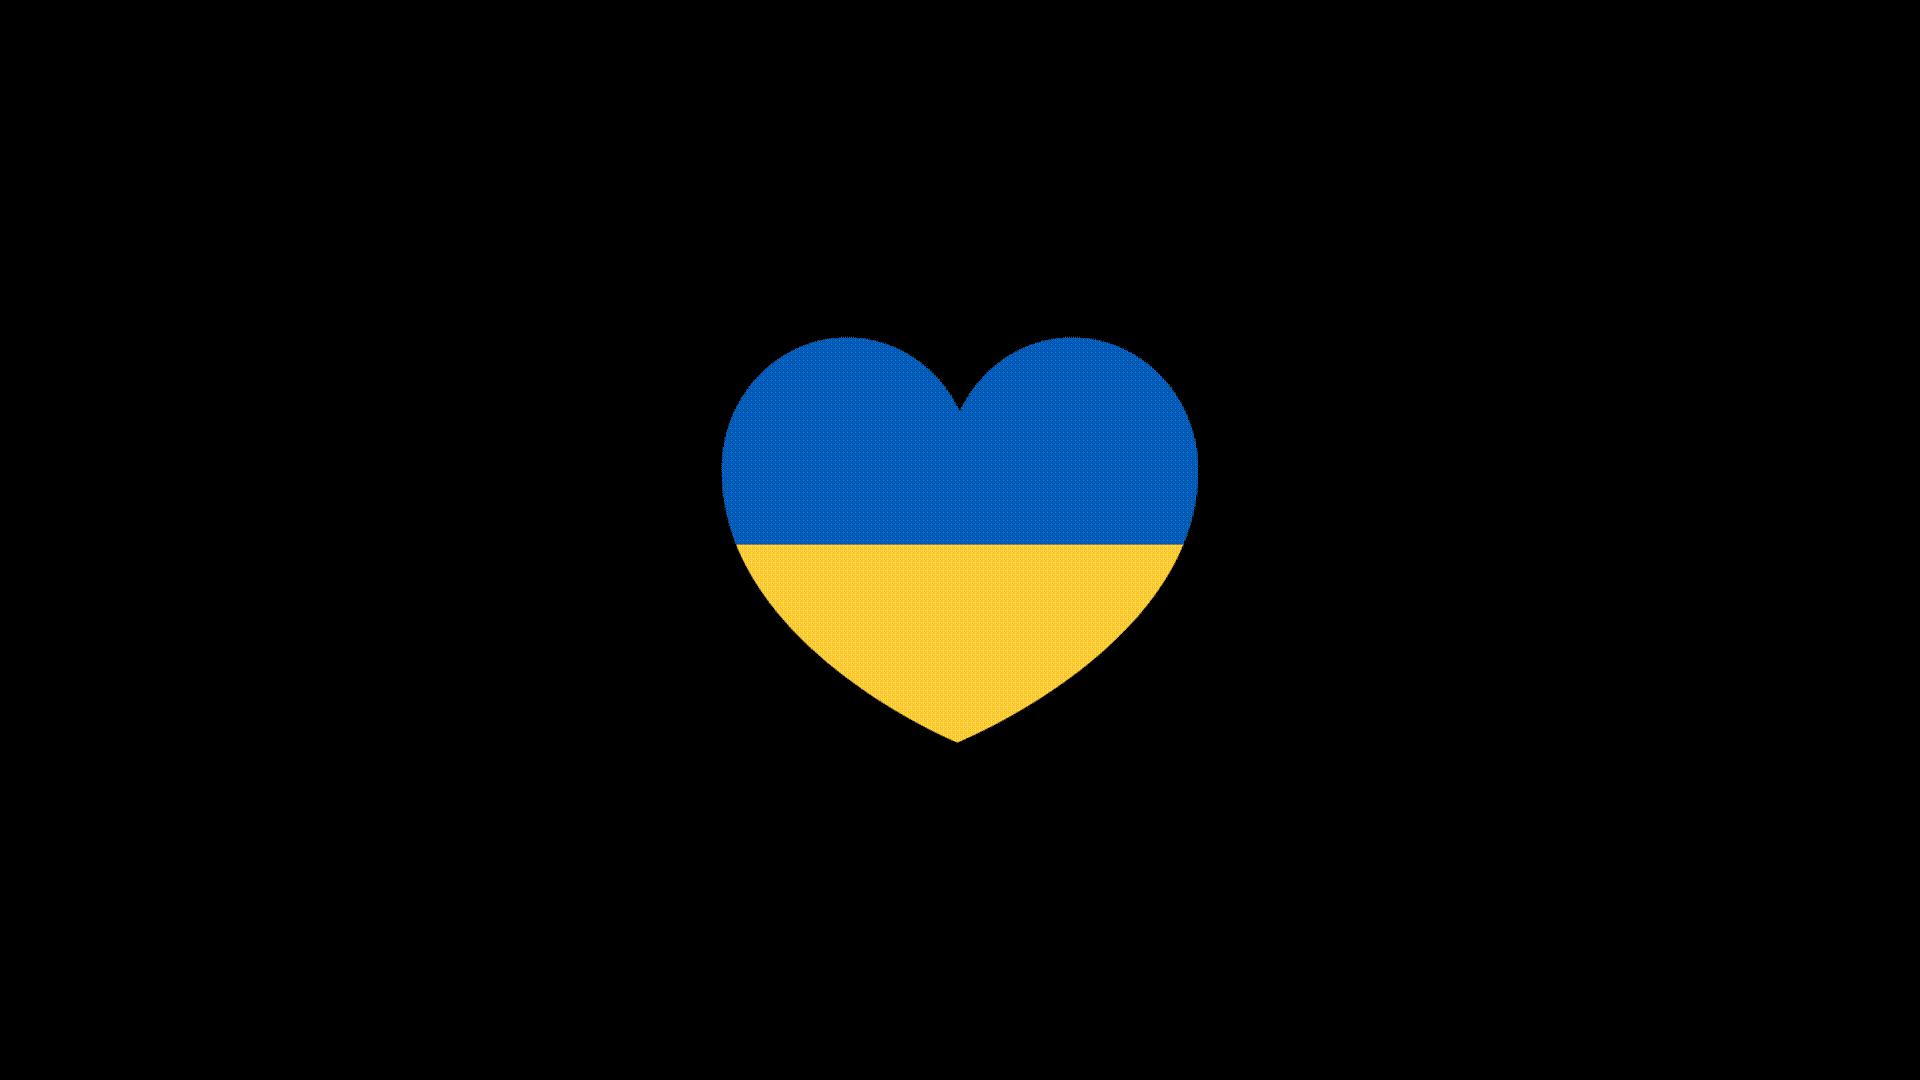 Abstraction for Ukraine - 2022 - Stand together, #StandWithUkraine